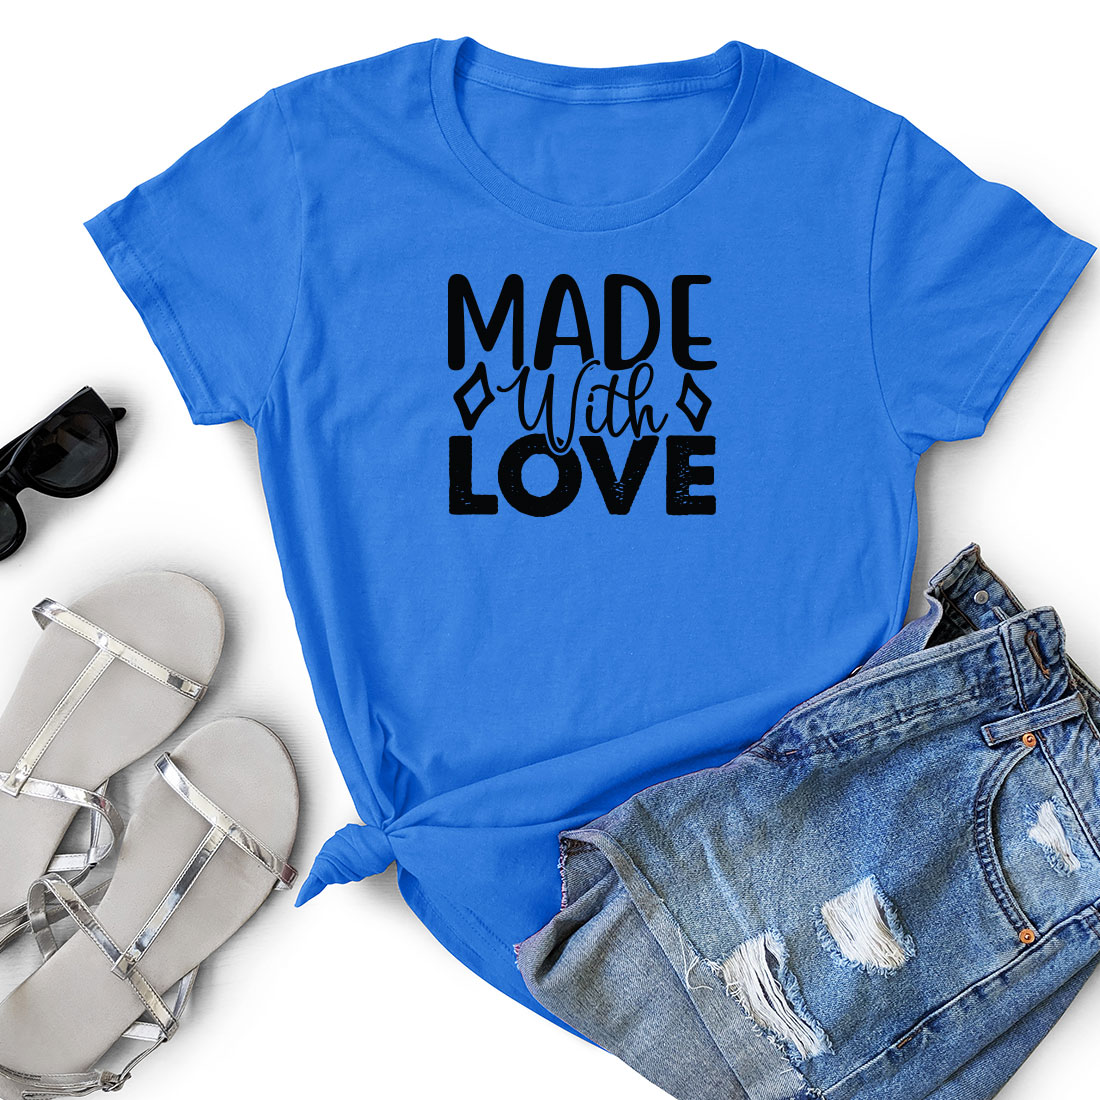 T - shirt that says made with love next to a pair of shorts.